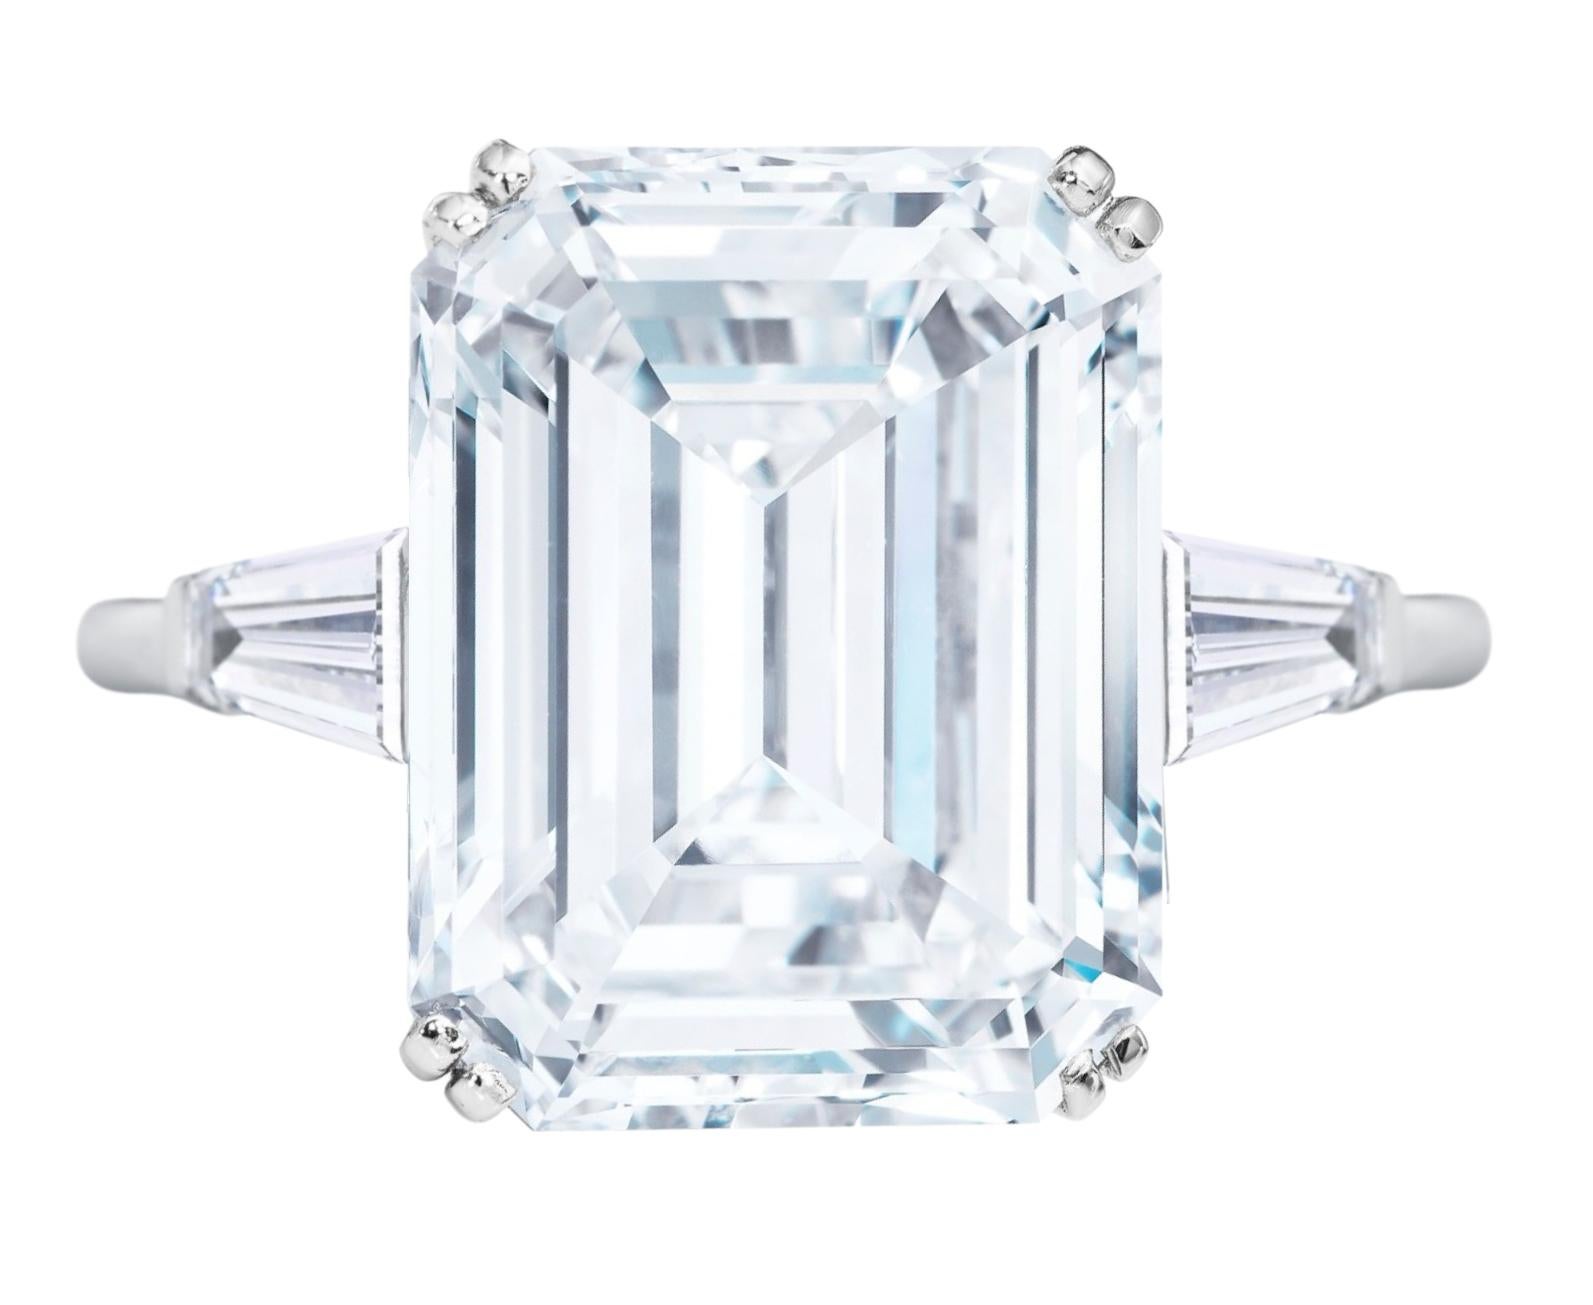 An exquisite emerald cut diamond ring composed by a main stone that weights 3 carats has an excellent proportion polish and symmetry. The side stones are tapered baguettes also very pure and white

The ring is set in 18 carats white gold

The stone